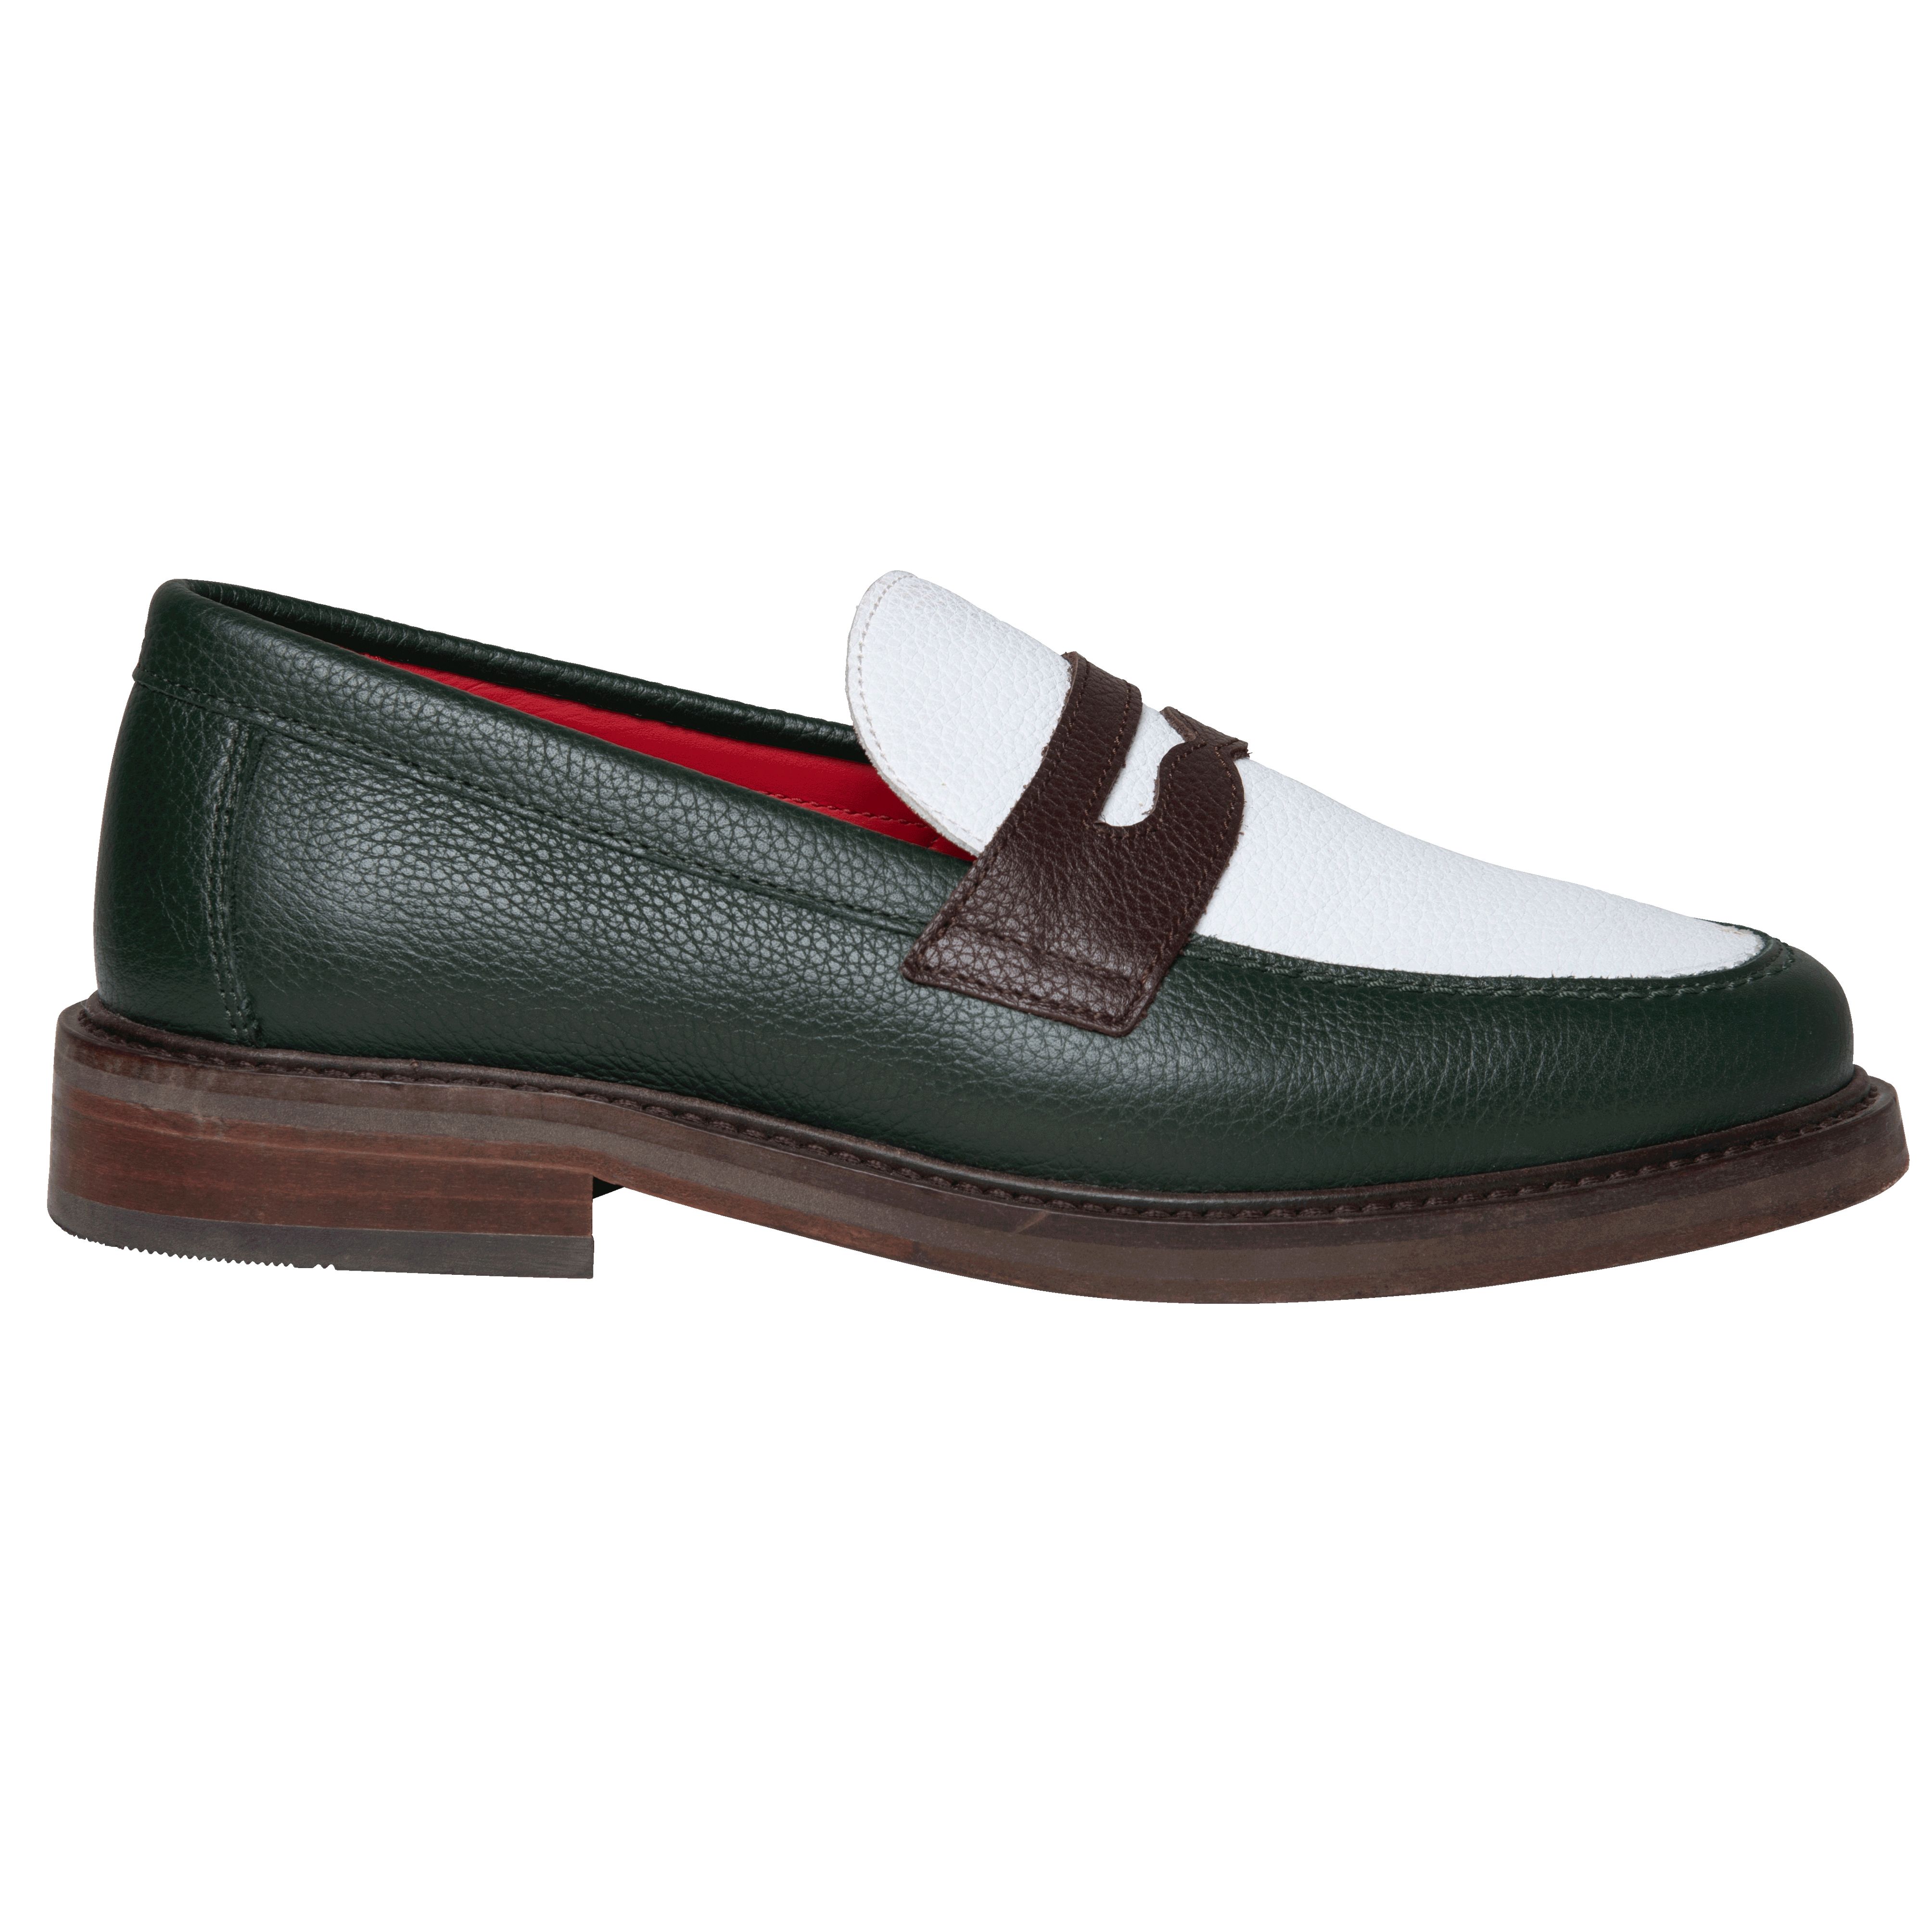 Aimé Leon Dore ALD Green And White Penny Loafers by Emily Oberg